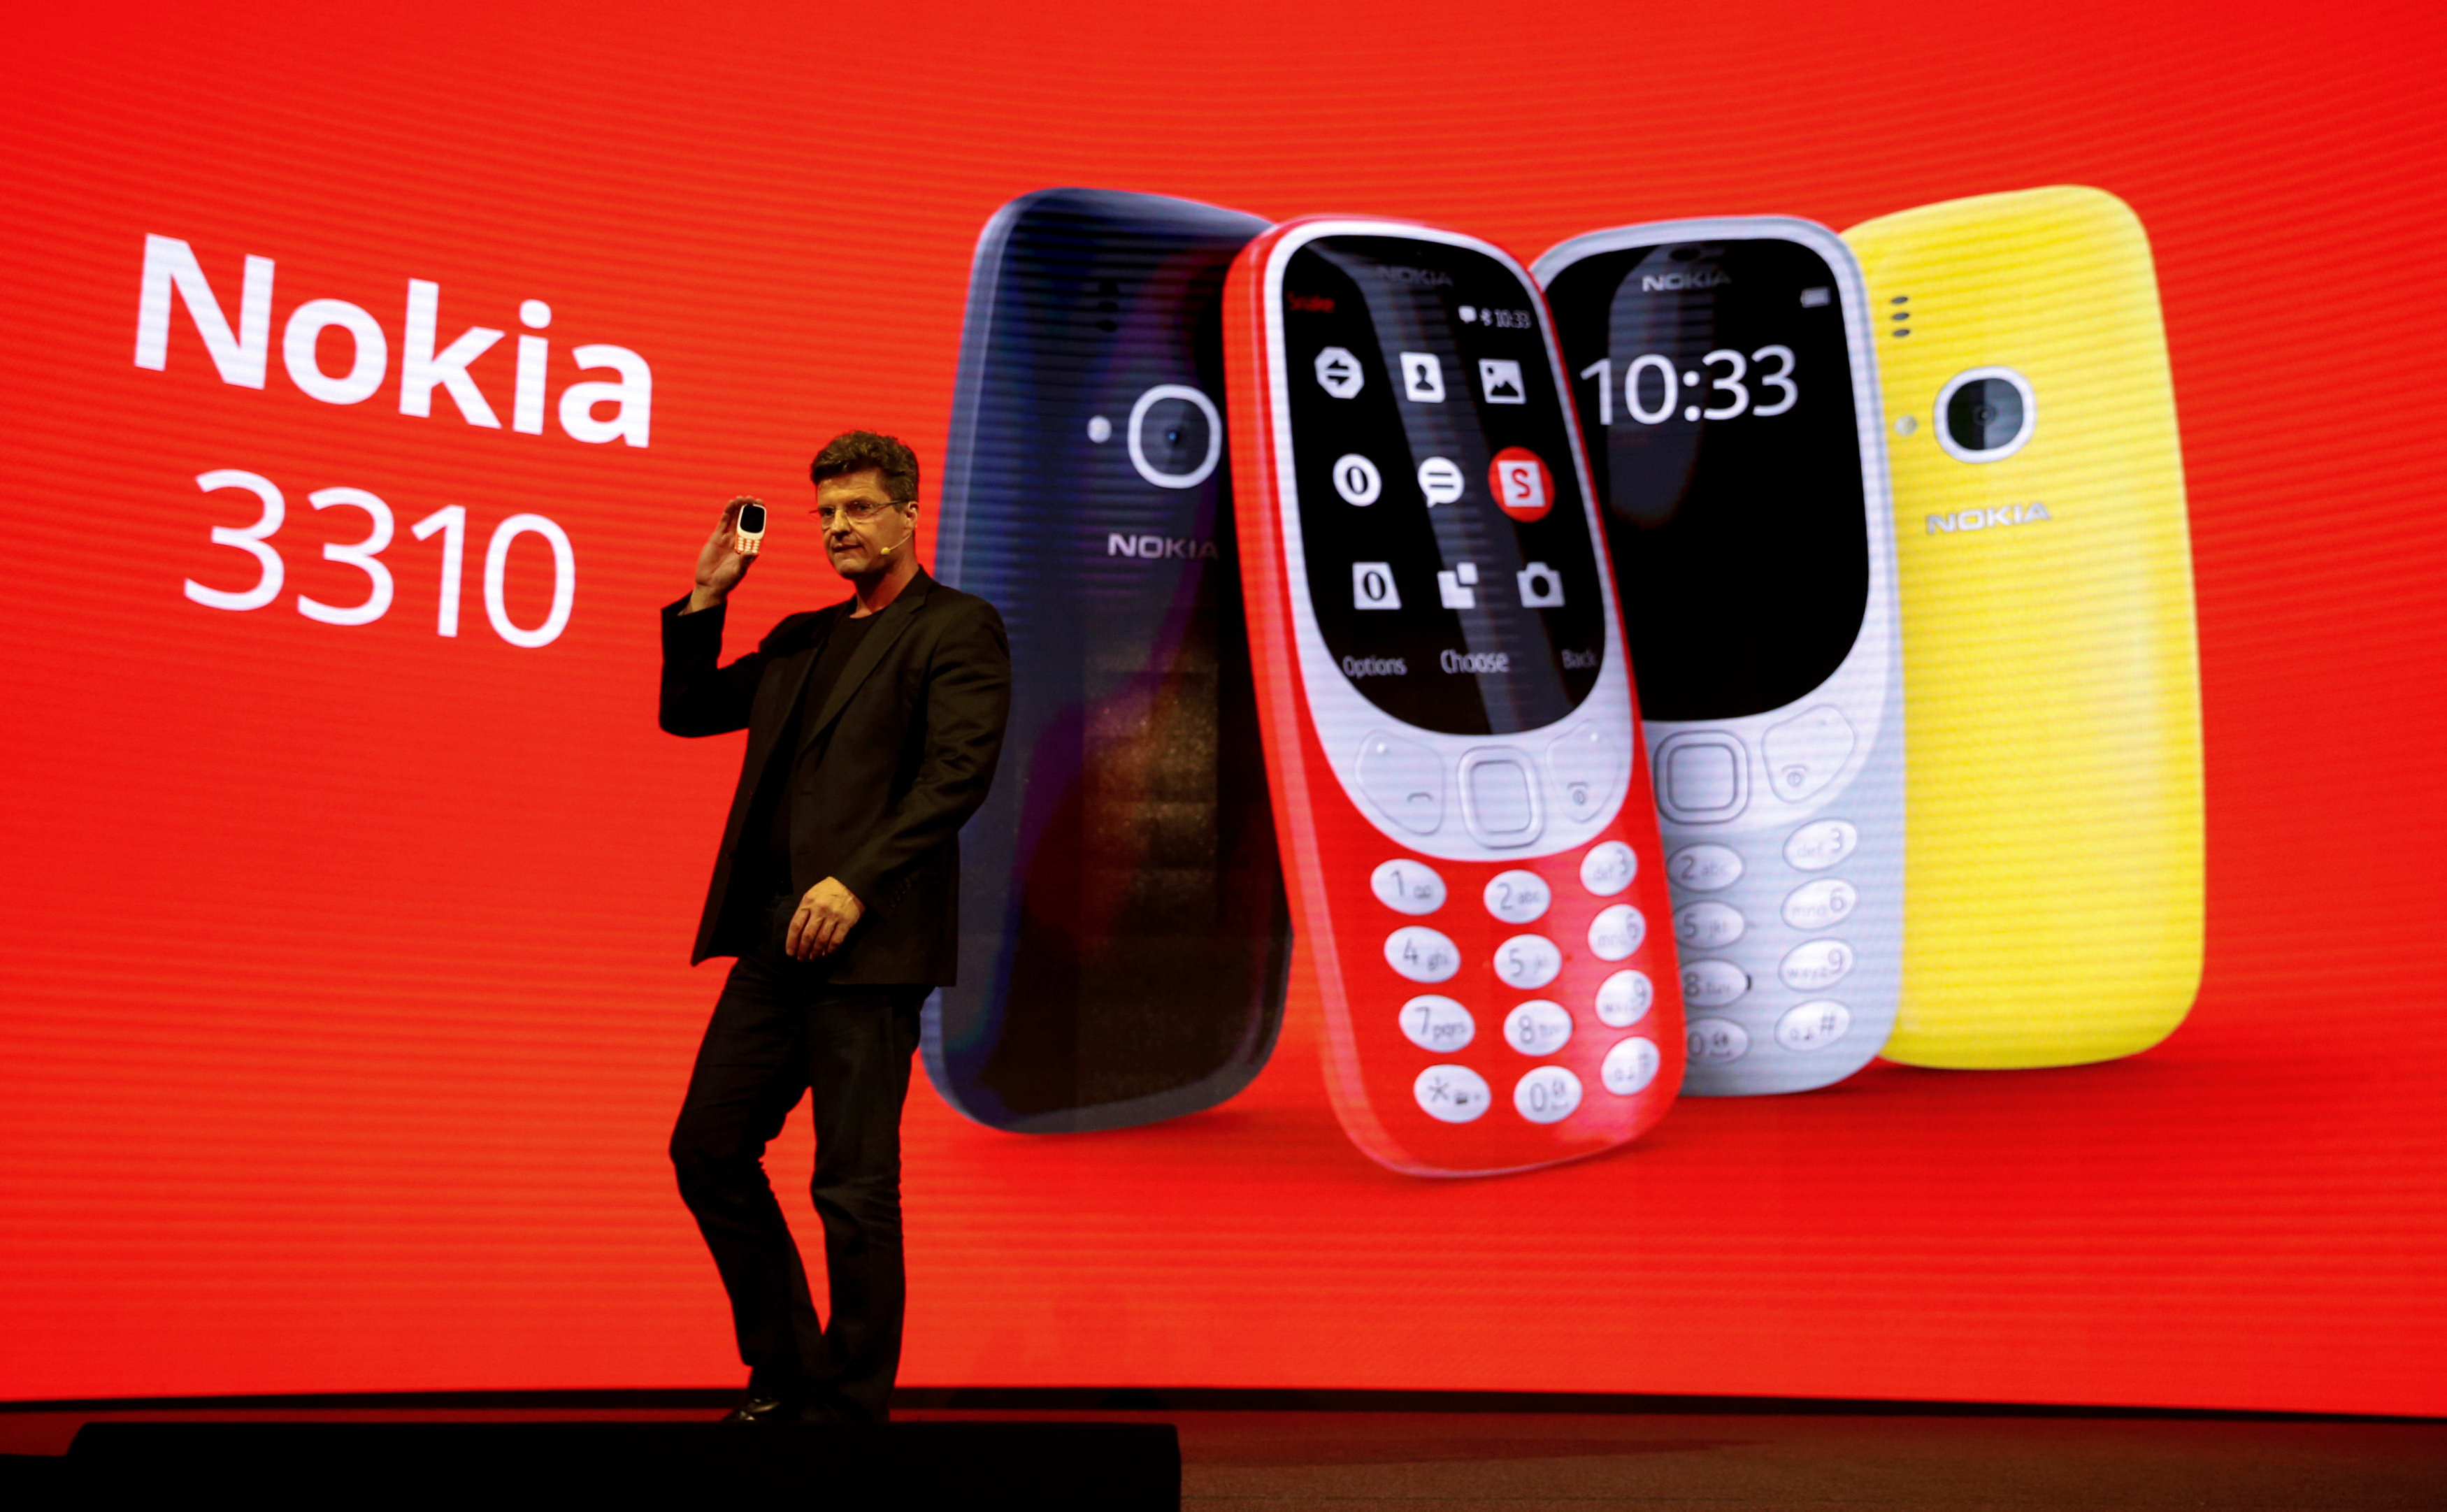 Nokia goes back to the future with 49 euro phone